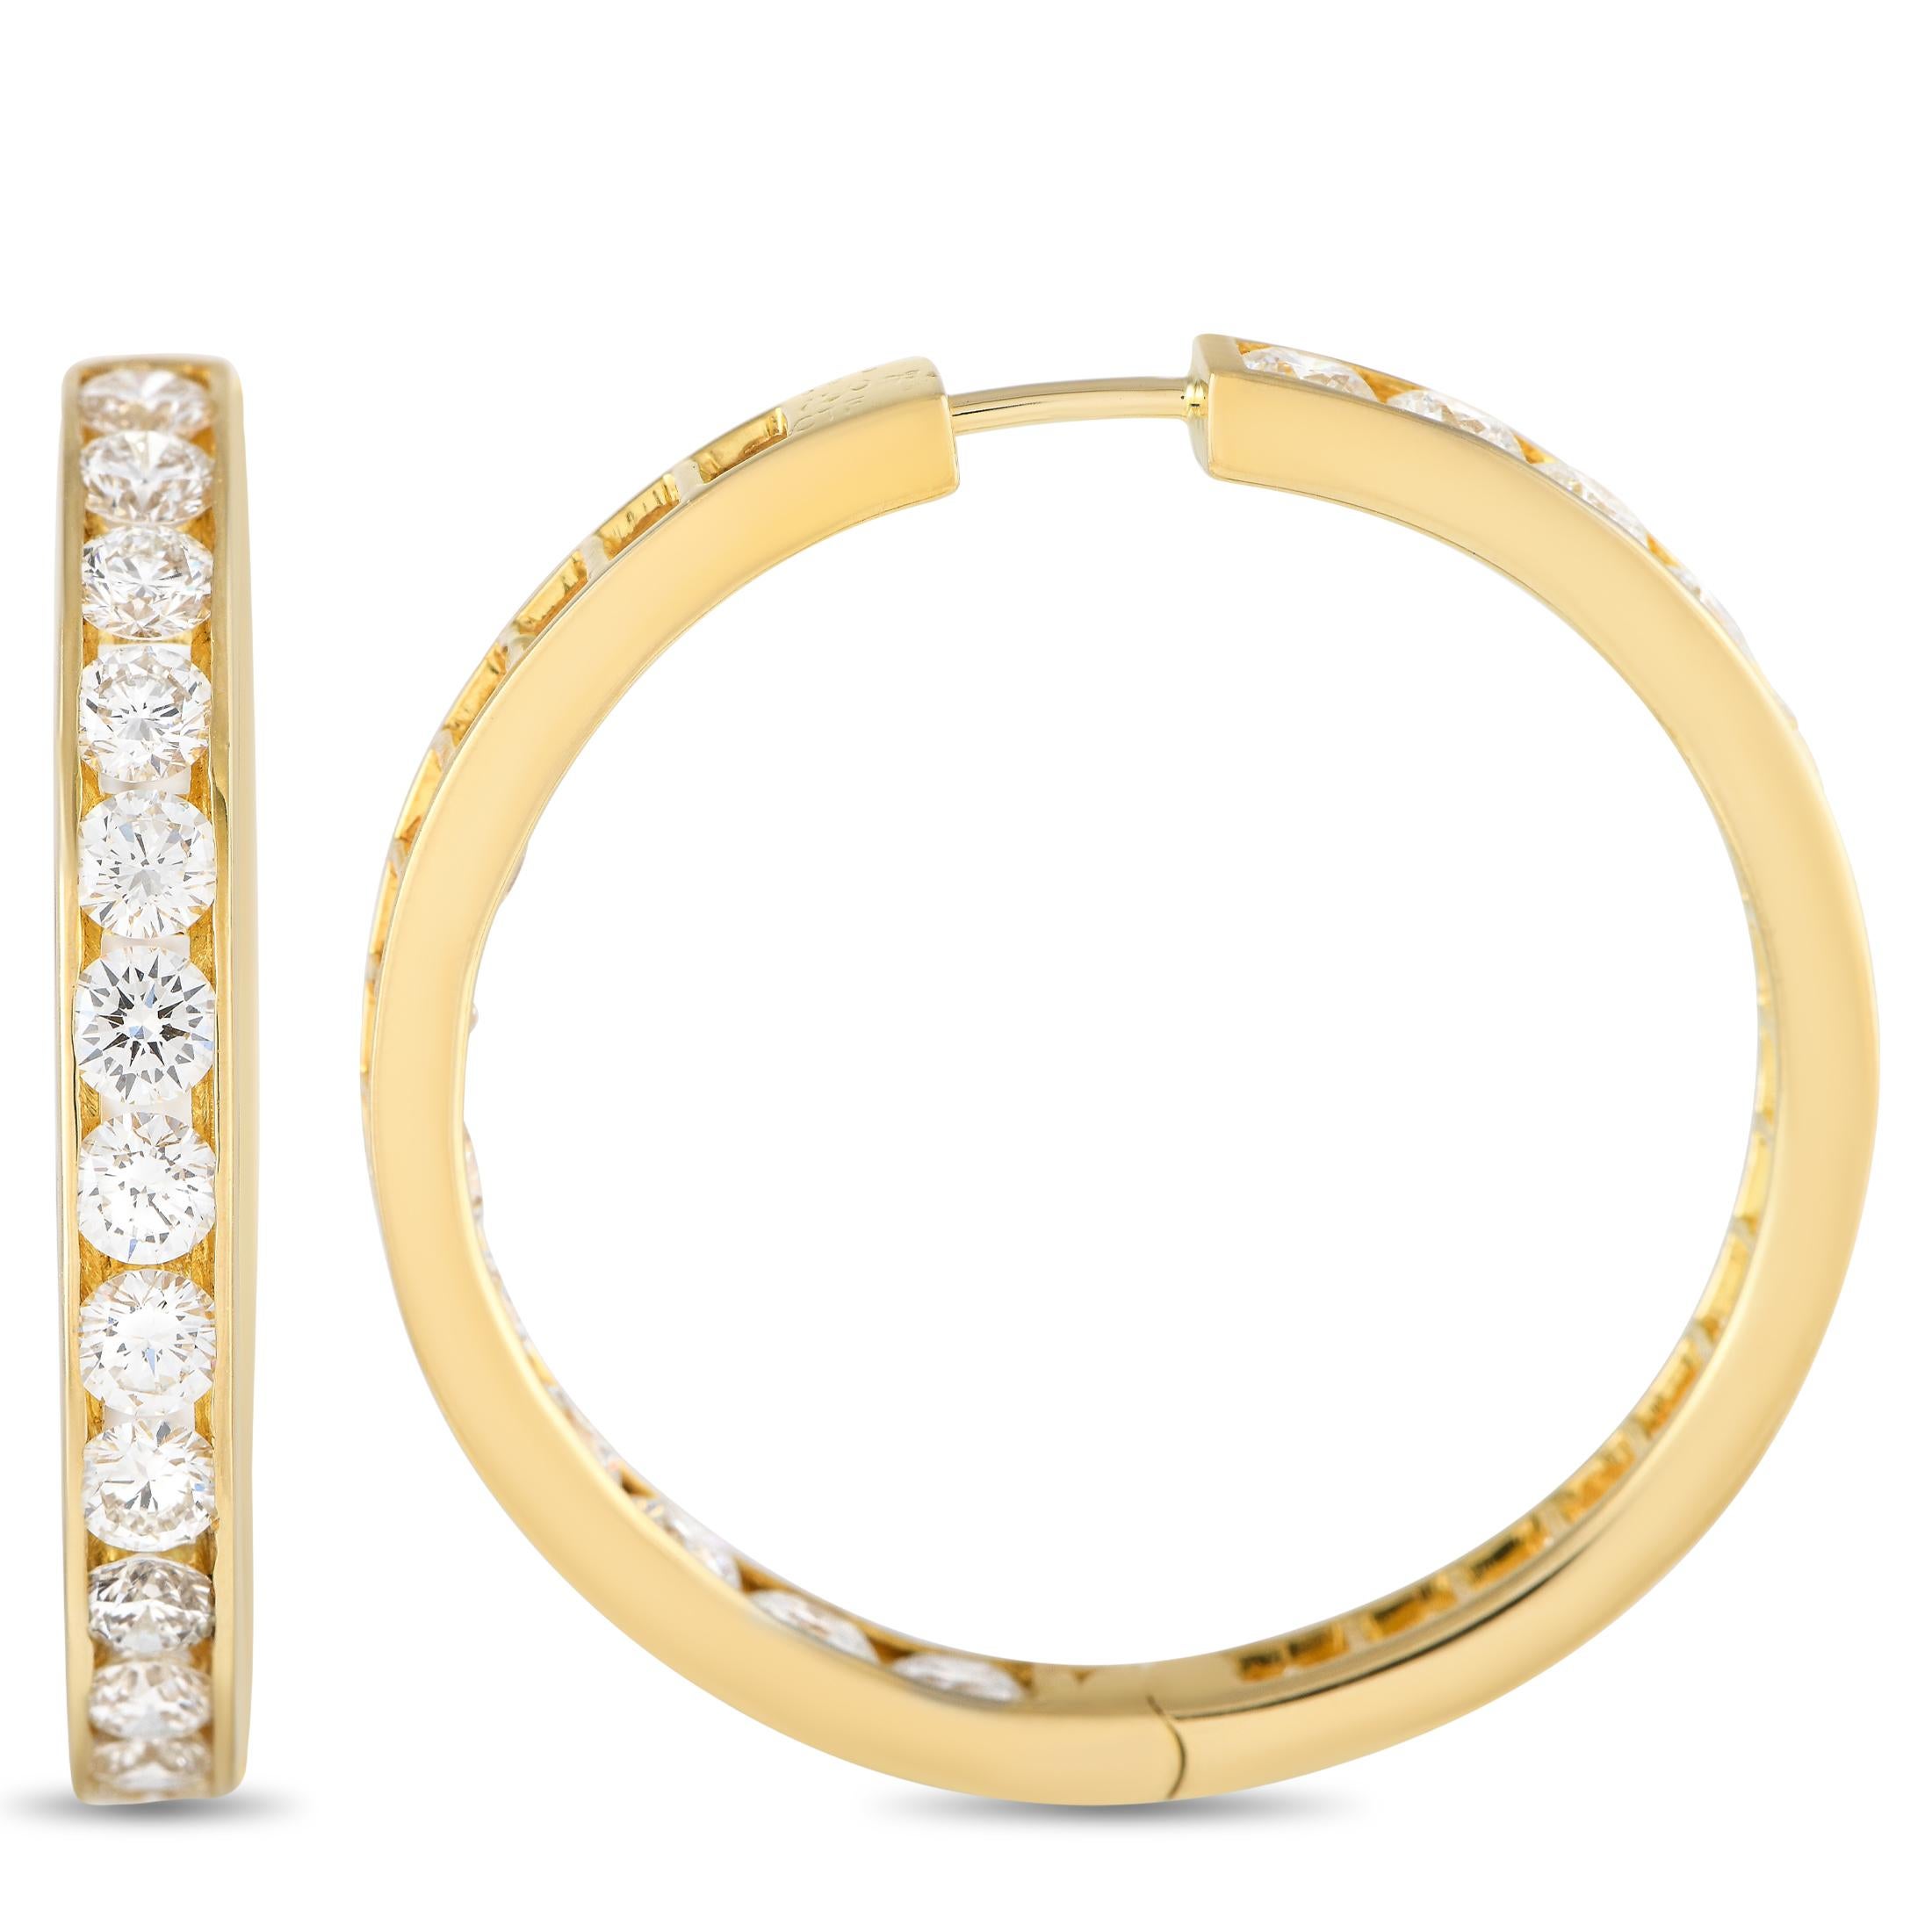 Shine bright with these diamond earrings. These ear sparklers are dripping in 7.20 carats of round diamonds, arranged in a stylish inside-out setting on 18K yellow gold hoops.Offered in estate condition, these 18K Yellow Gold 7.20ct Diamond